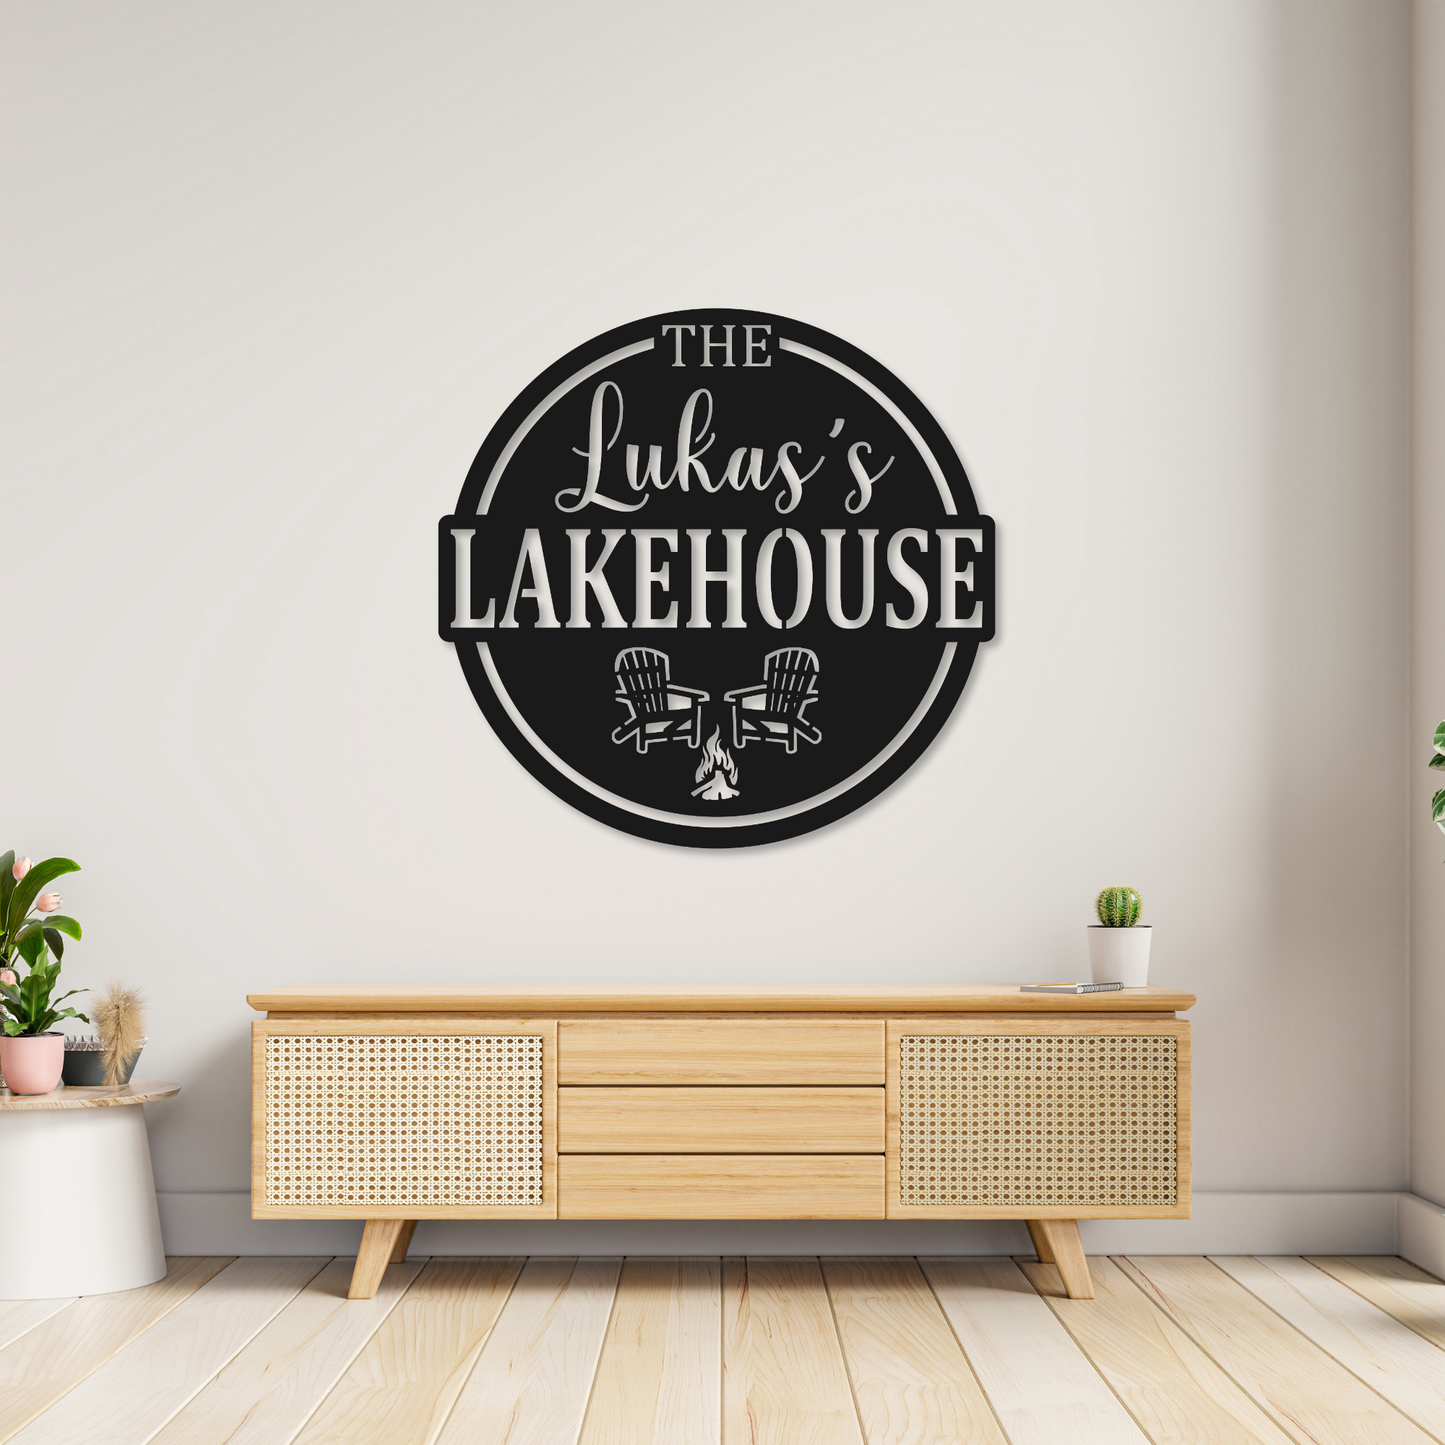 Personalized Family Name Metal Sign | Metal Cottage Lakehouse Chair Sign